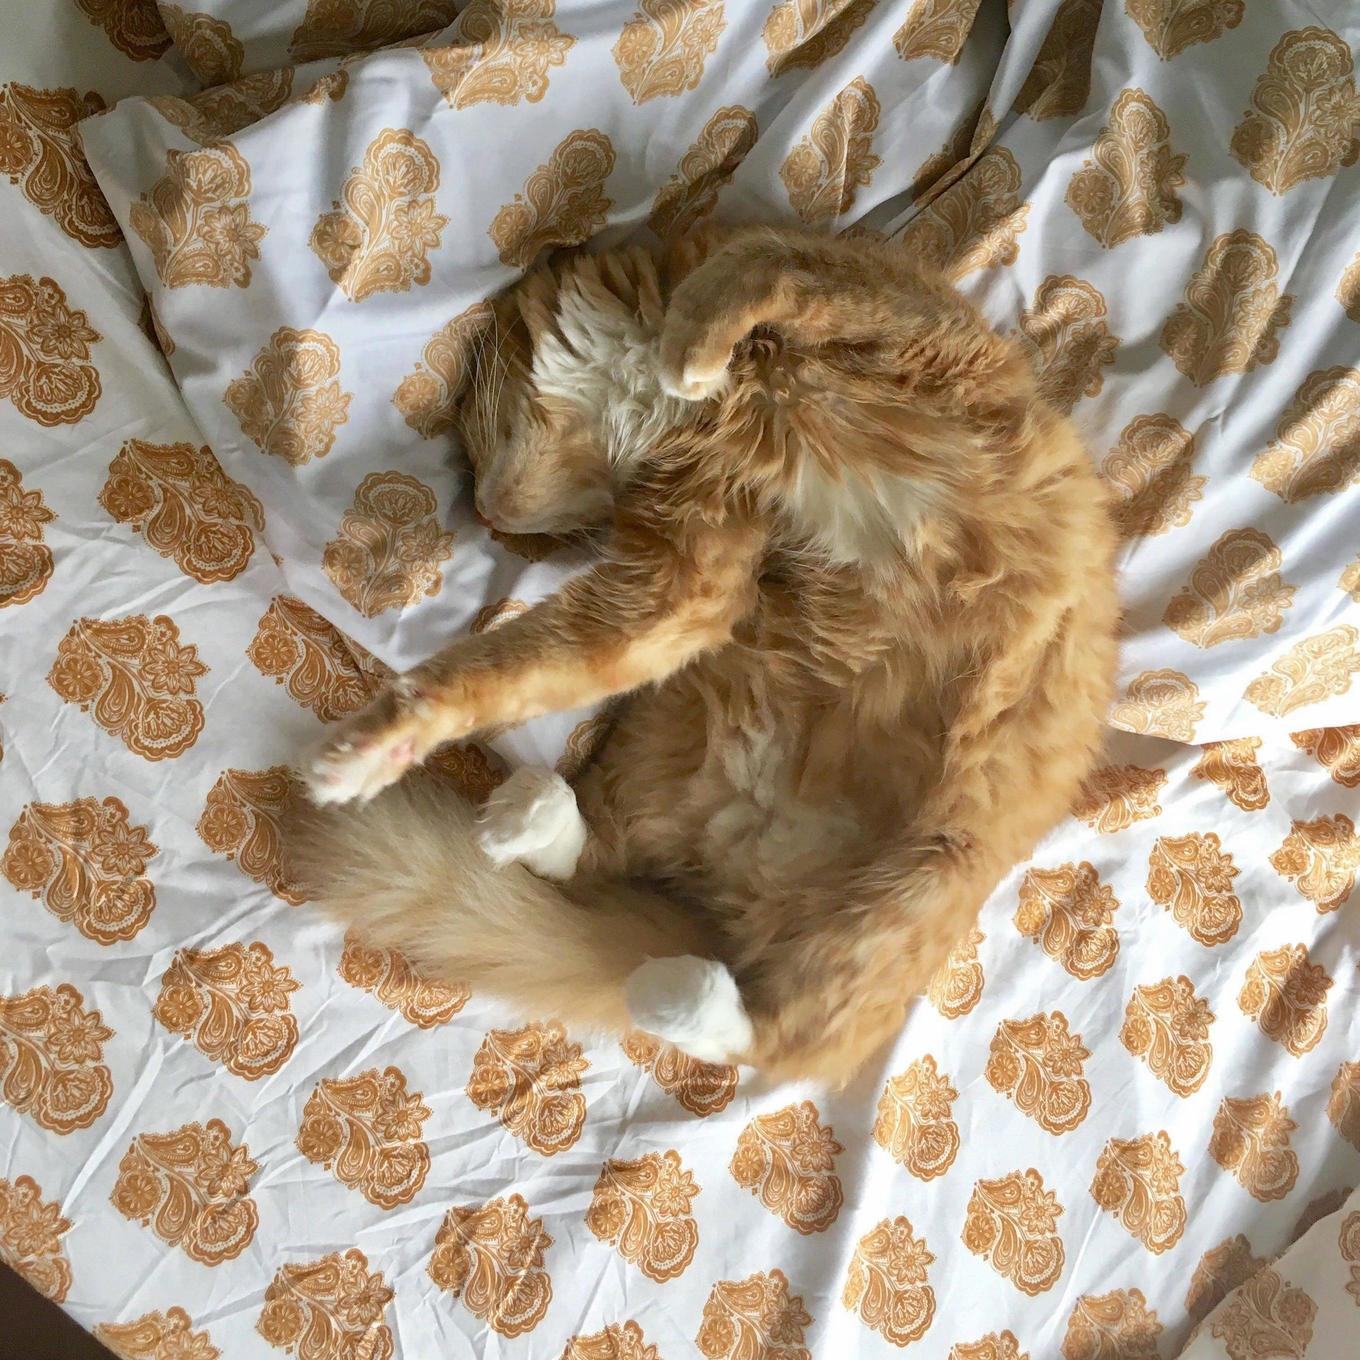 When your cat matches the bedspread